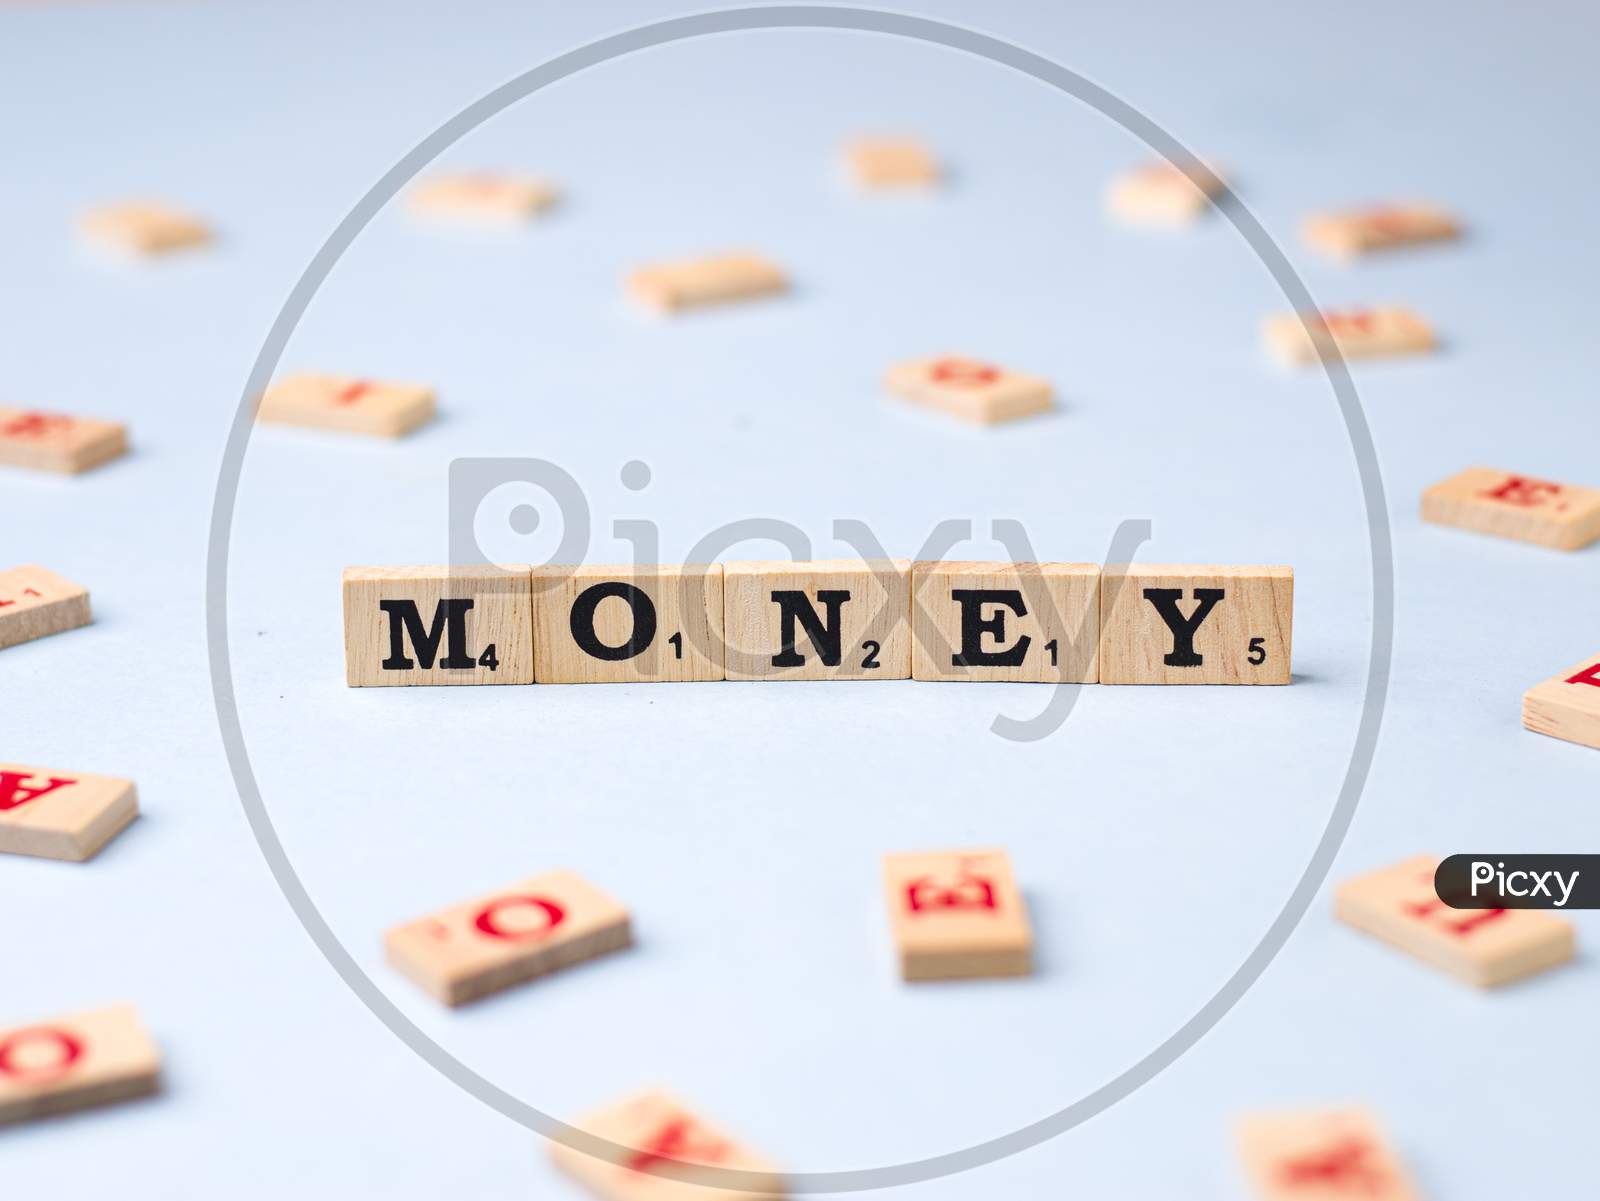 Assam, india - March 30, 2021 : Word MONEY written on wooden cubes stock image.